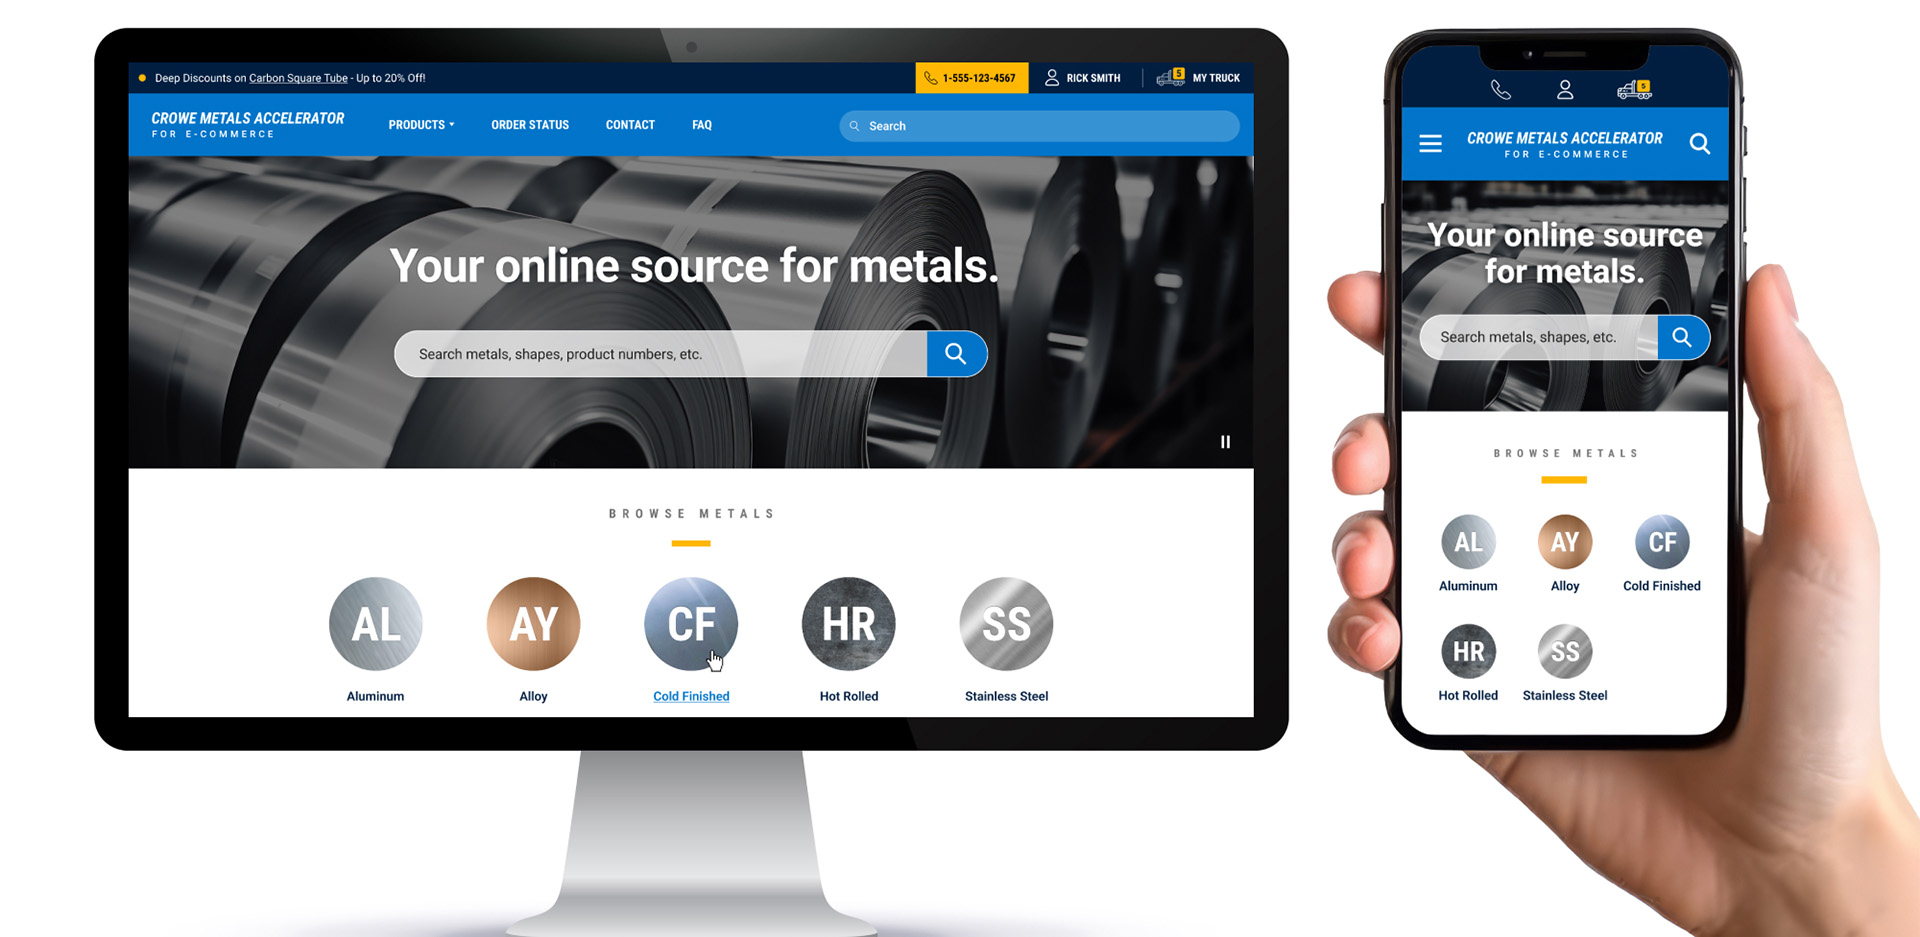 Crowe Metals Accelerator for E-commerce is an ERP solution tailored by metal specialists.